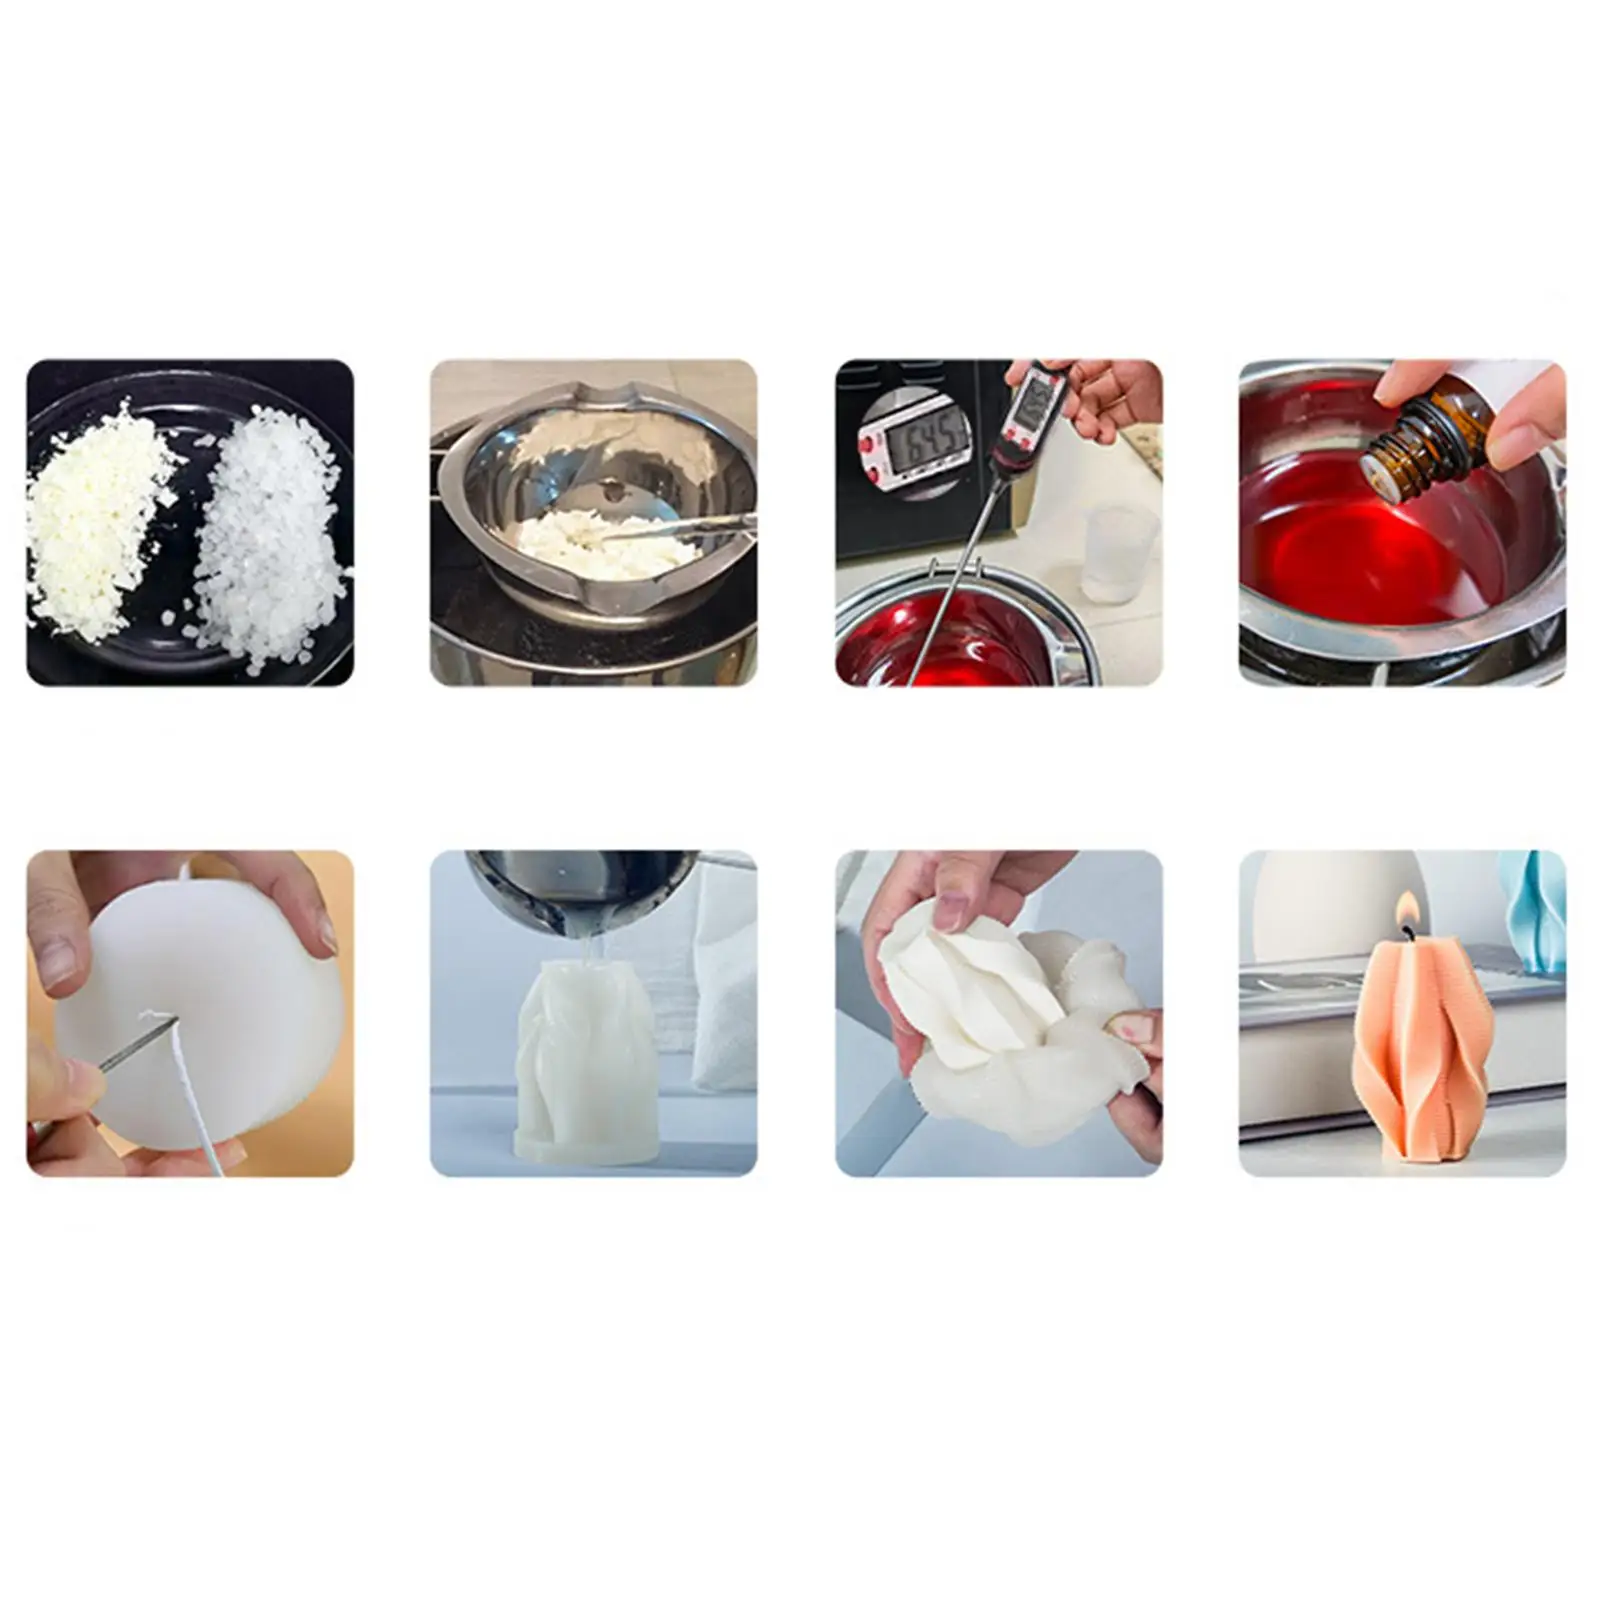 3D Silicone Model, Resin Casting Candle Making, Clay Crafts Handcraft Plaster DIY Decoration Supplies